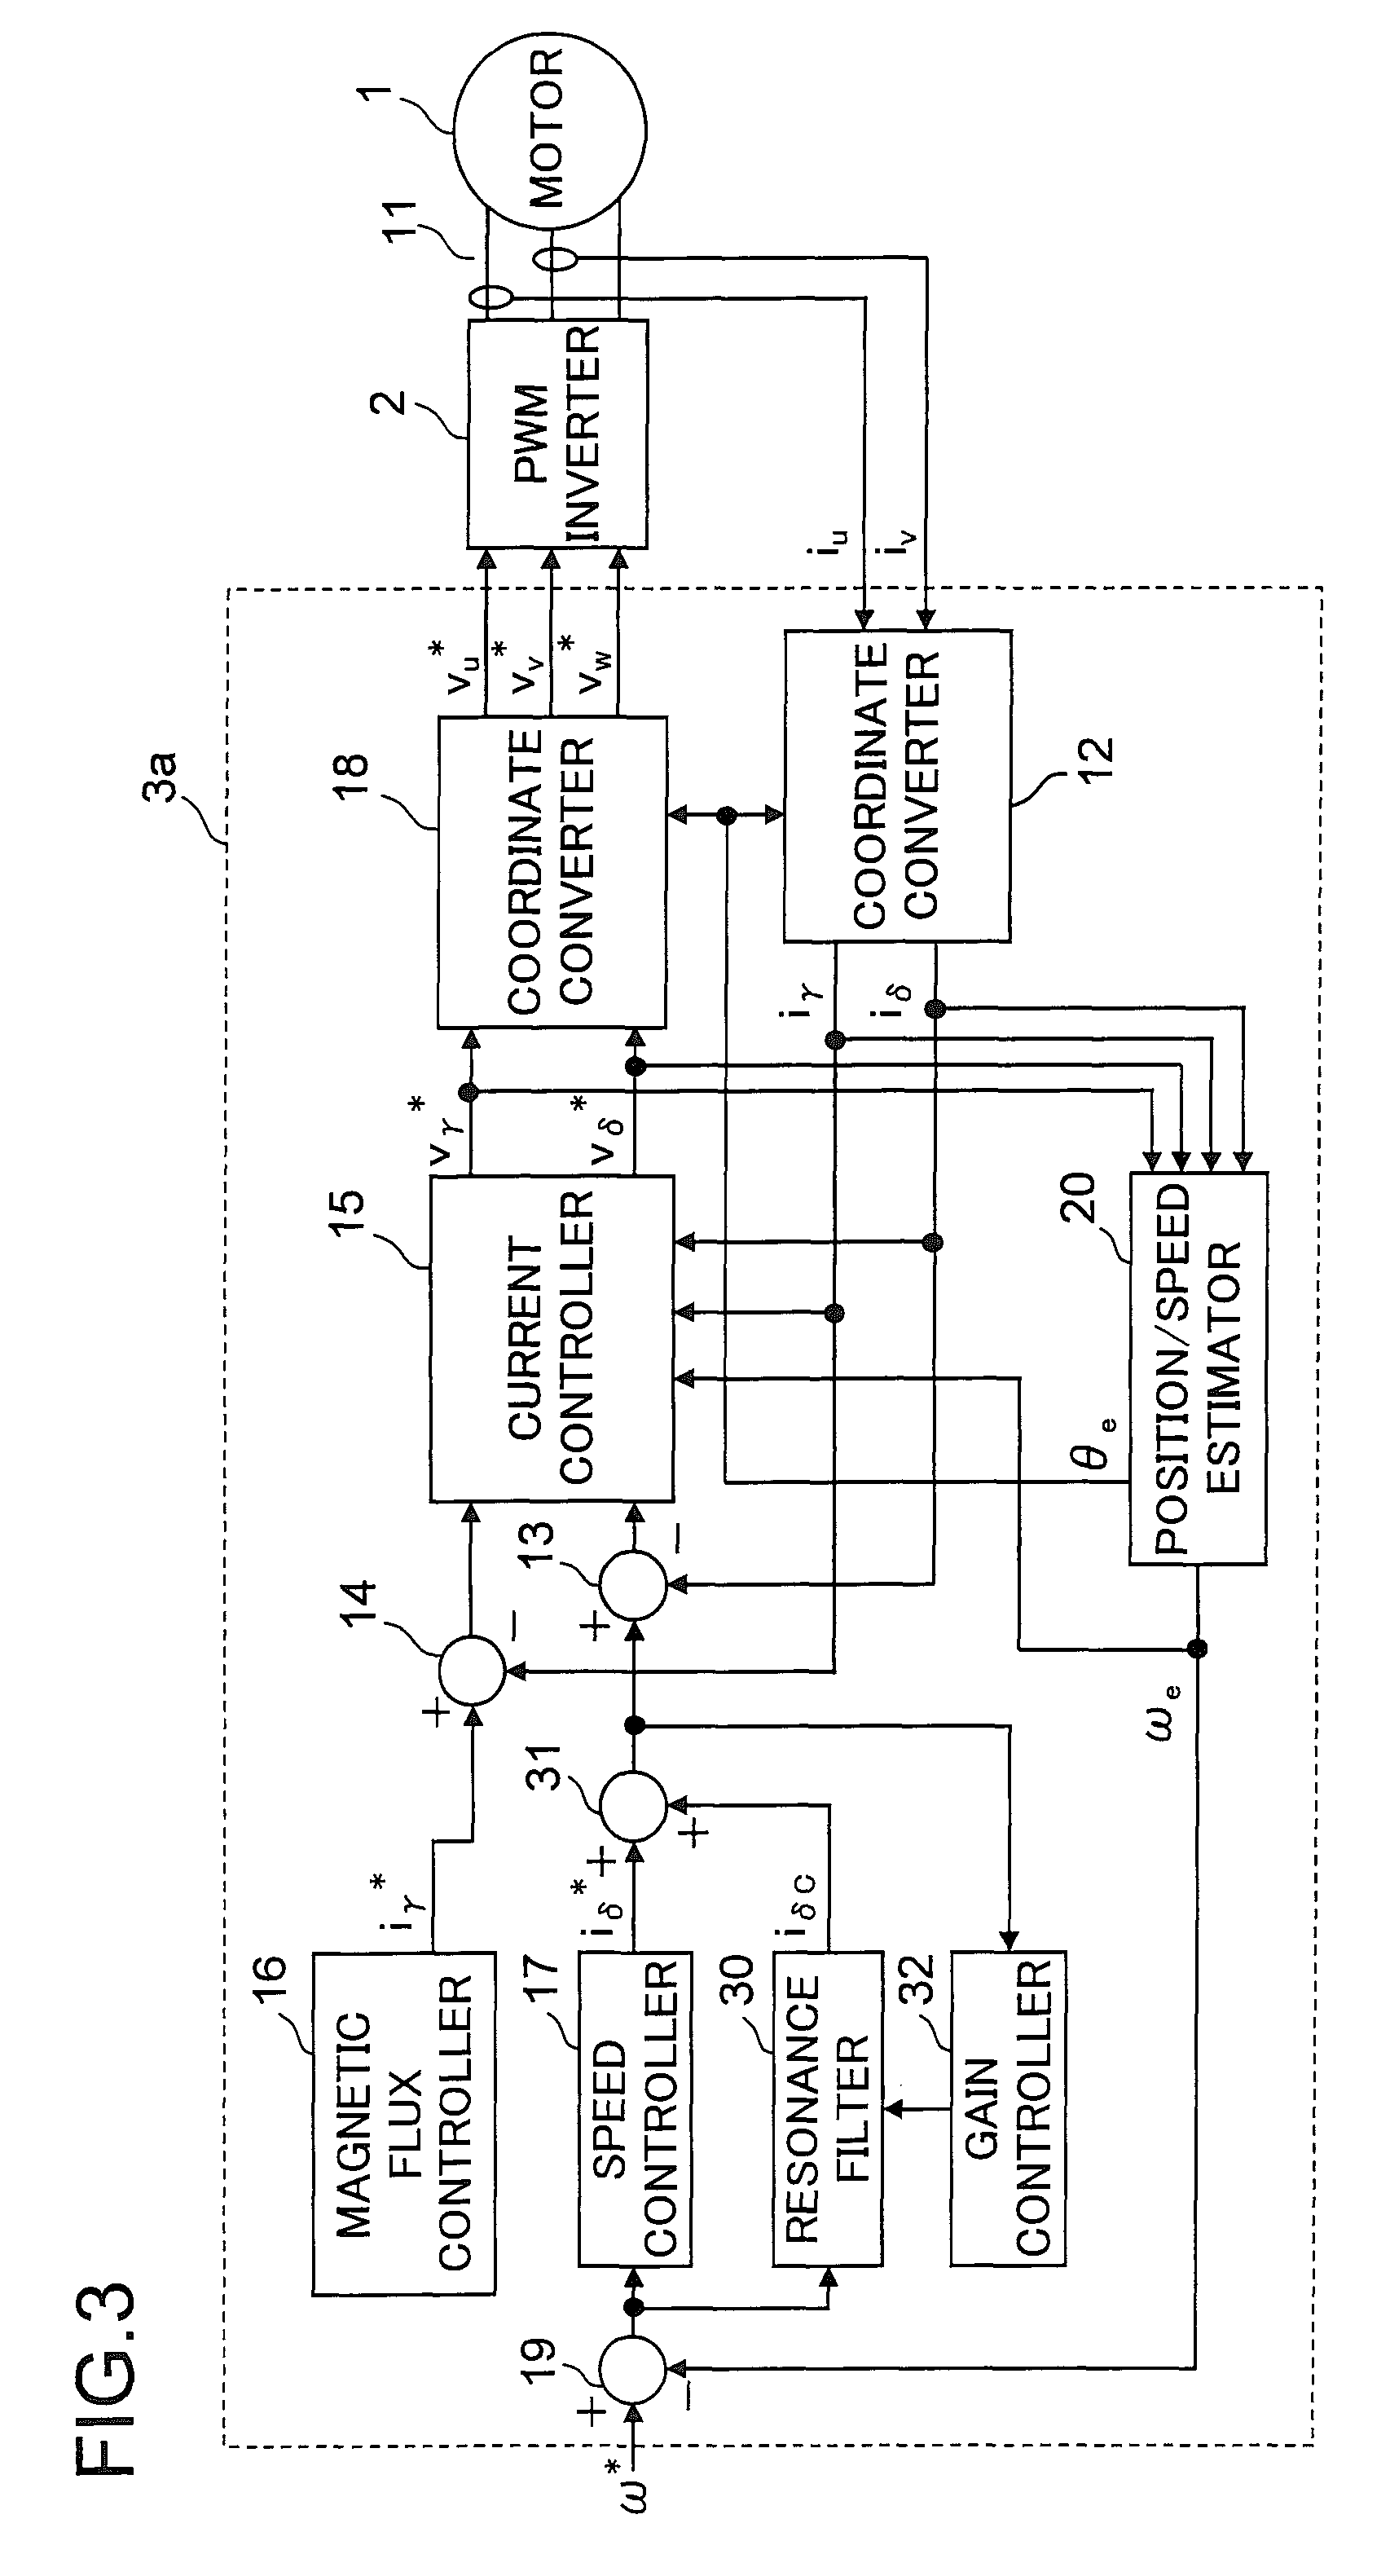 Motor control device and compressor